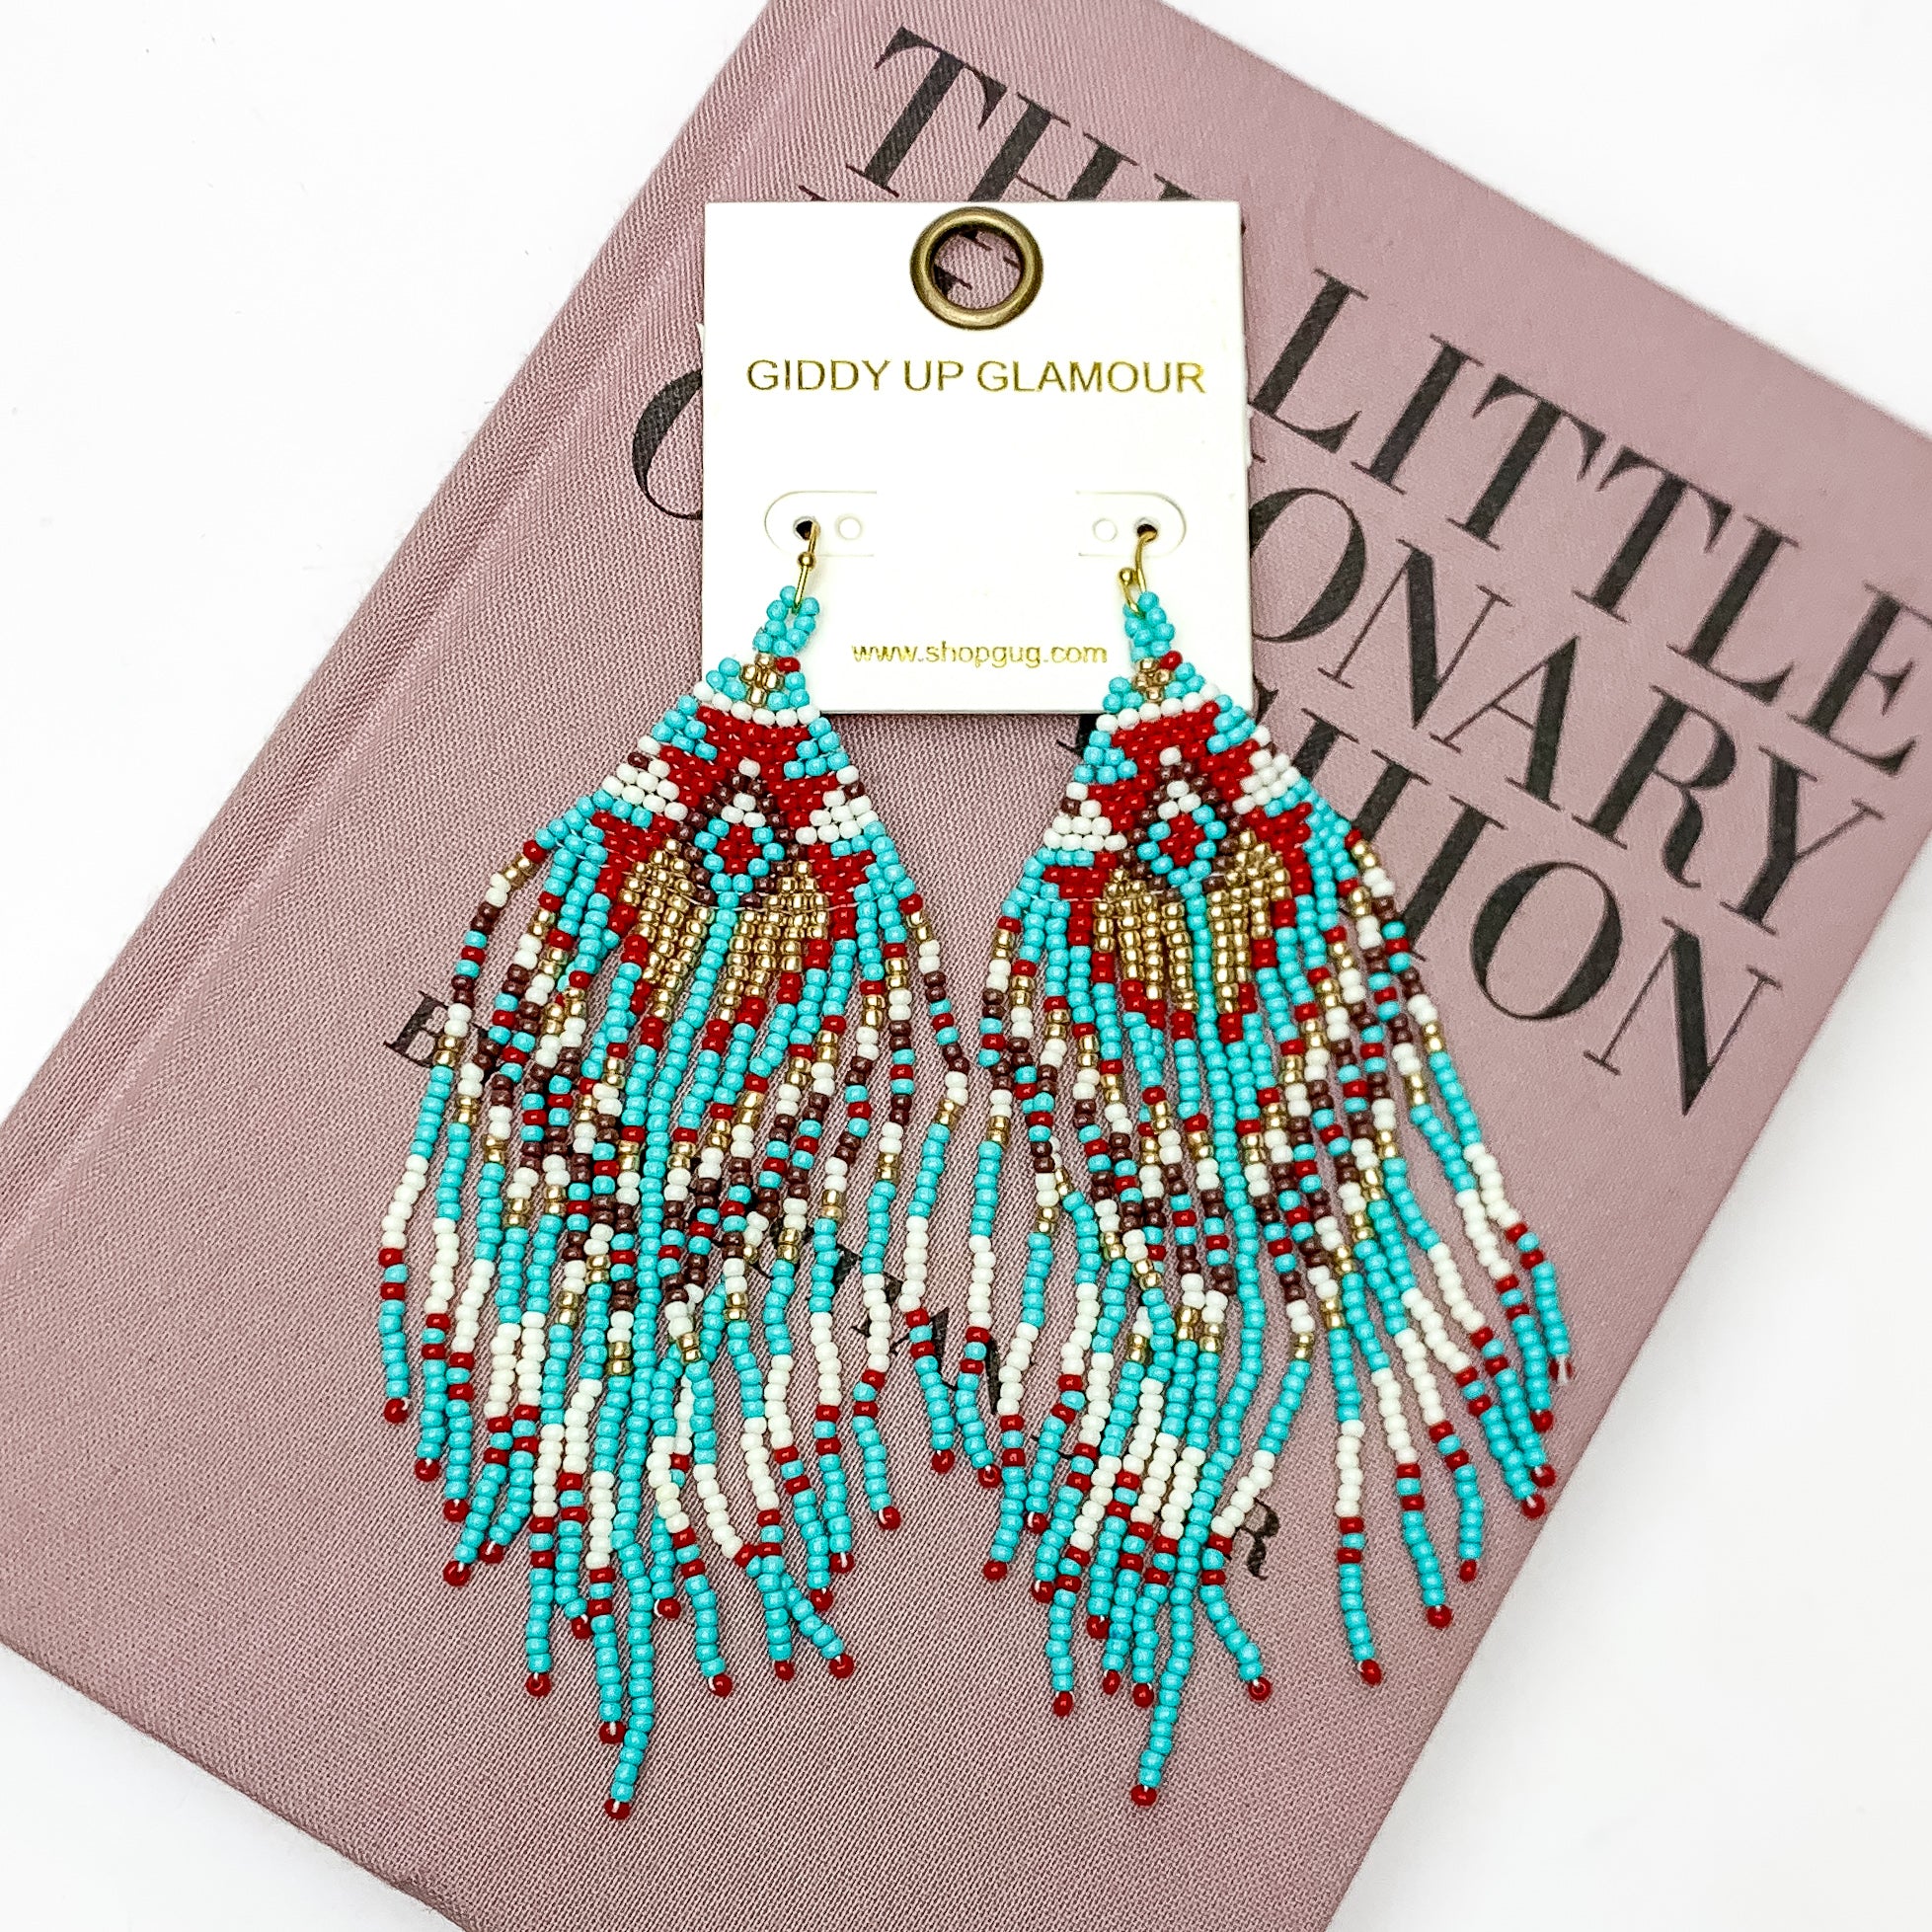 Upbeat Days Seed Bead Aztec Earrings with Beaded Fringe in Turquoise Multicolor - Giddy Up Glamour Boutique